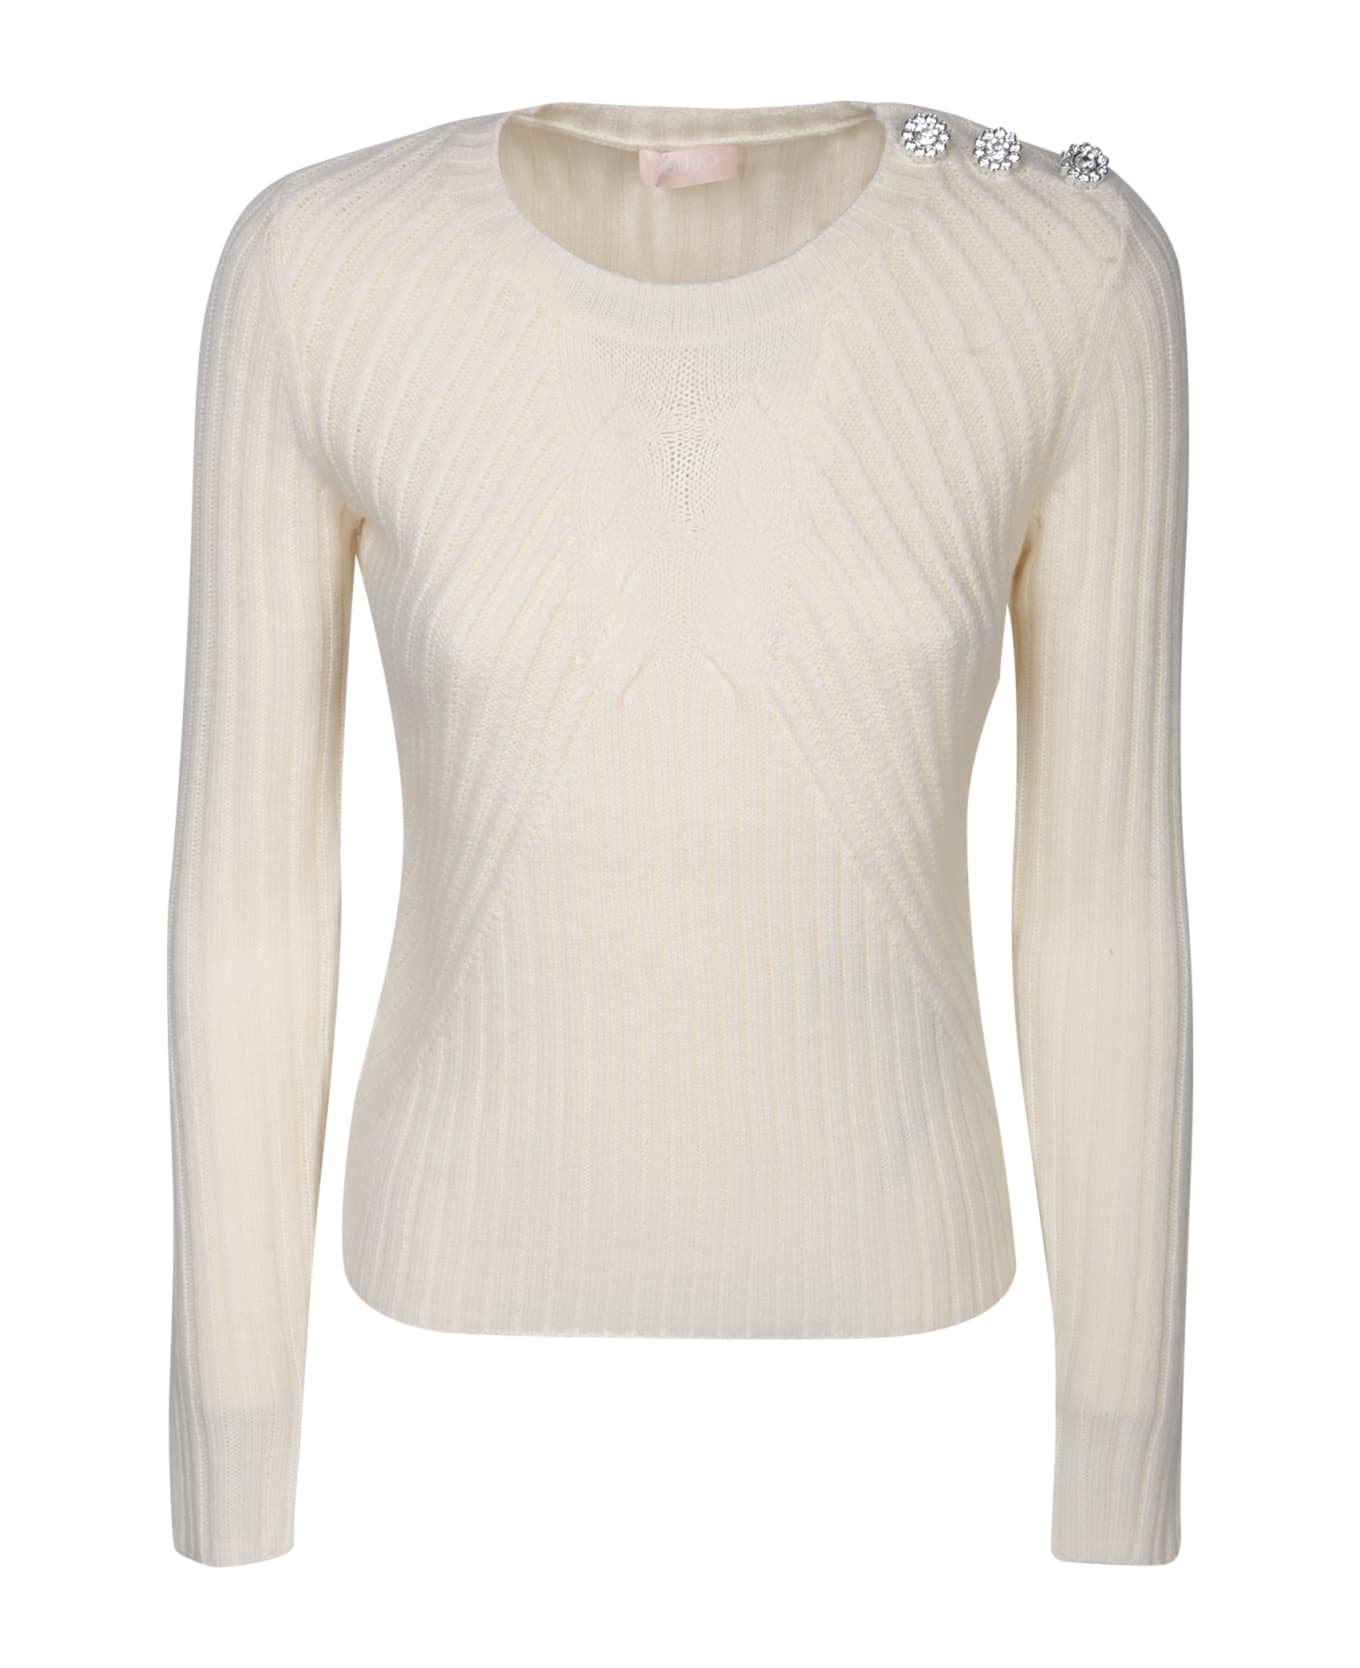 Liu-Jo Jewelled Buttons On The Shoulder White Pullover By Liu Jo - White ニットウェア